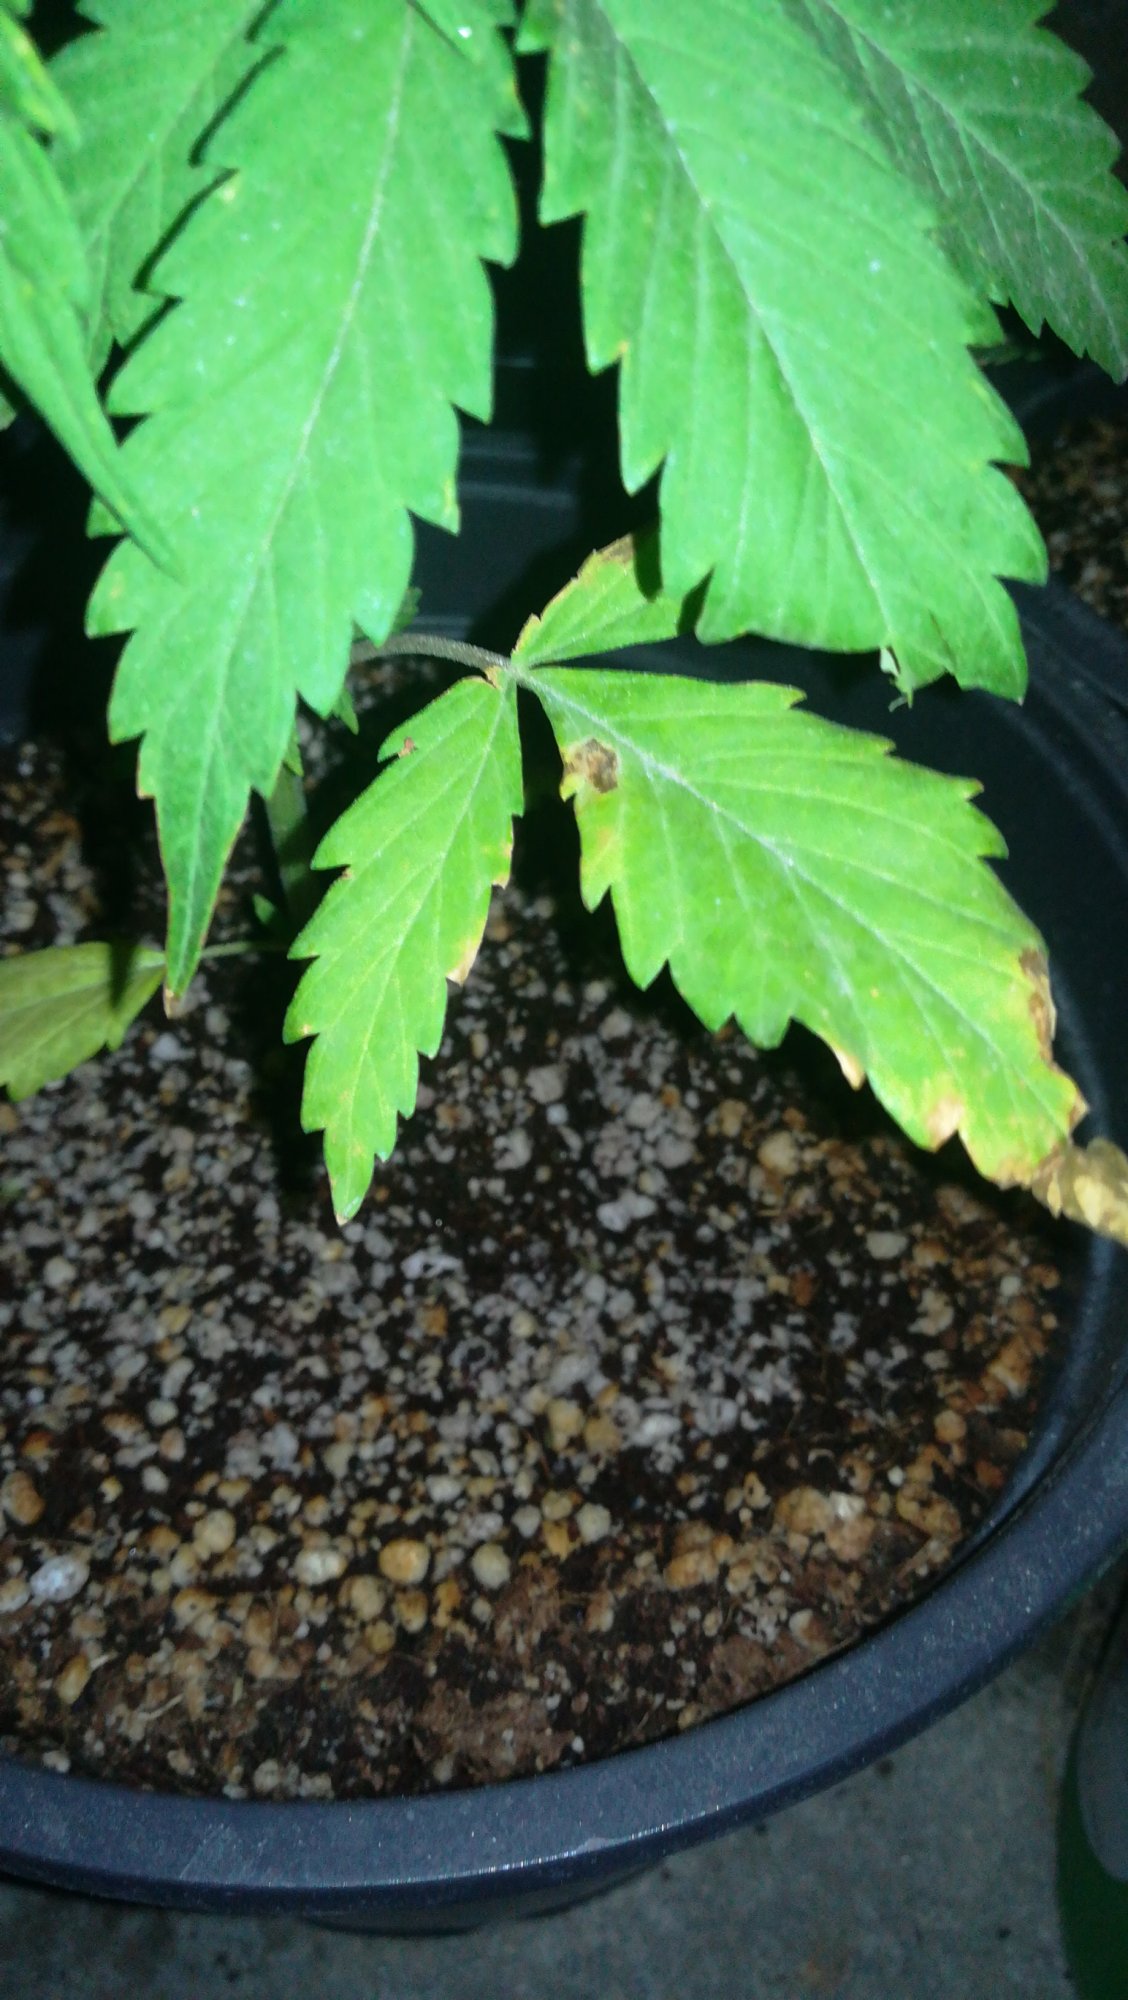 Black spots and yellowbrown spots on leaves 14